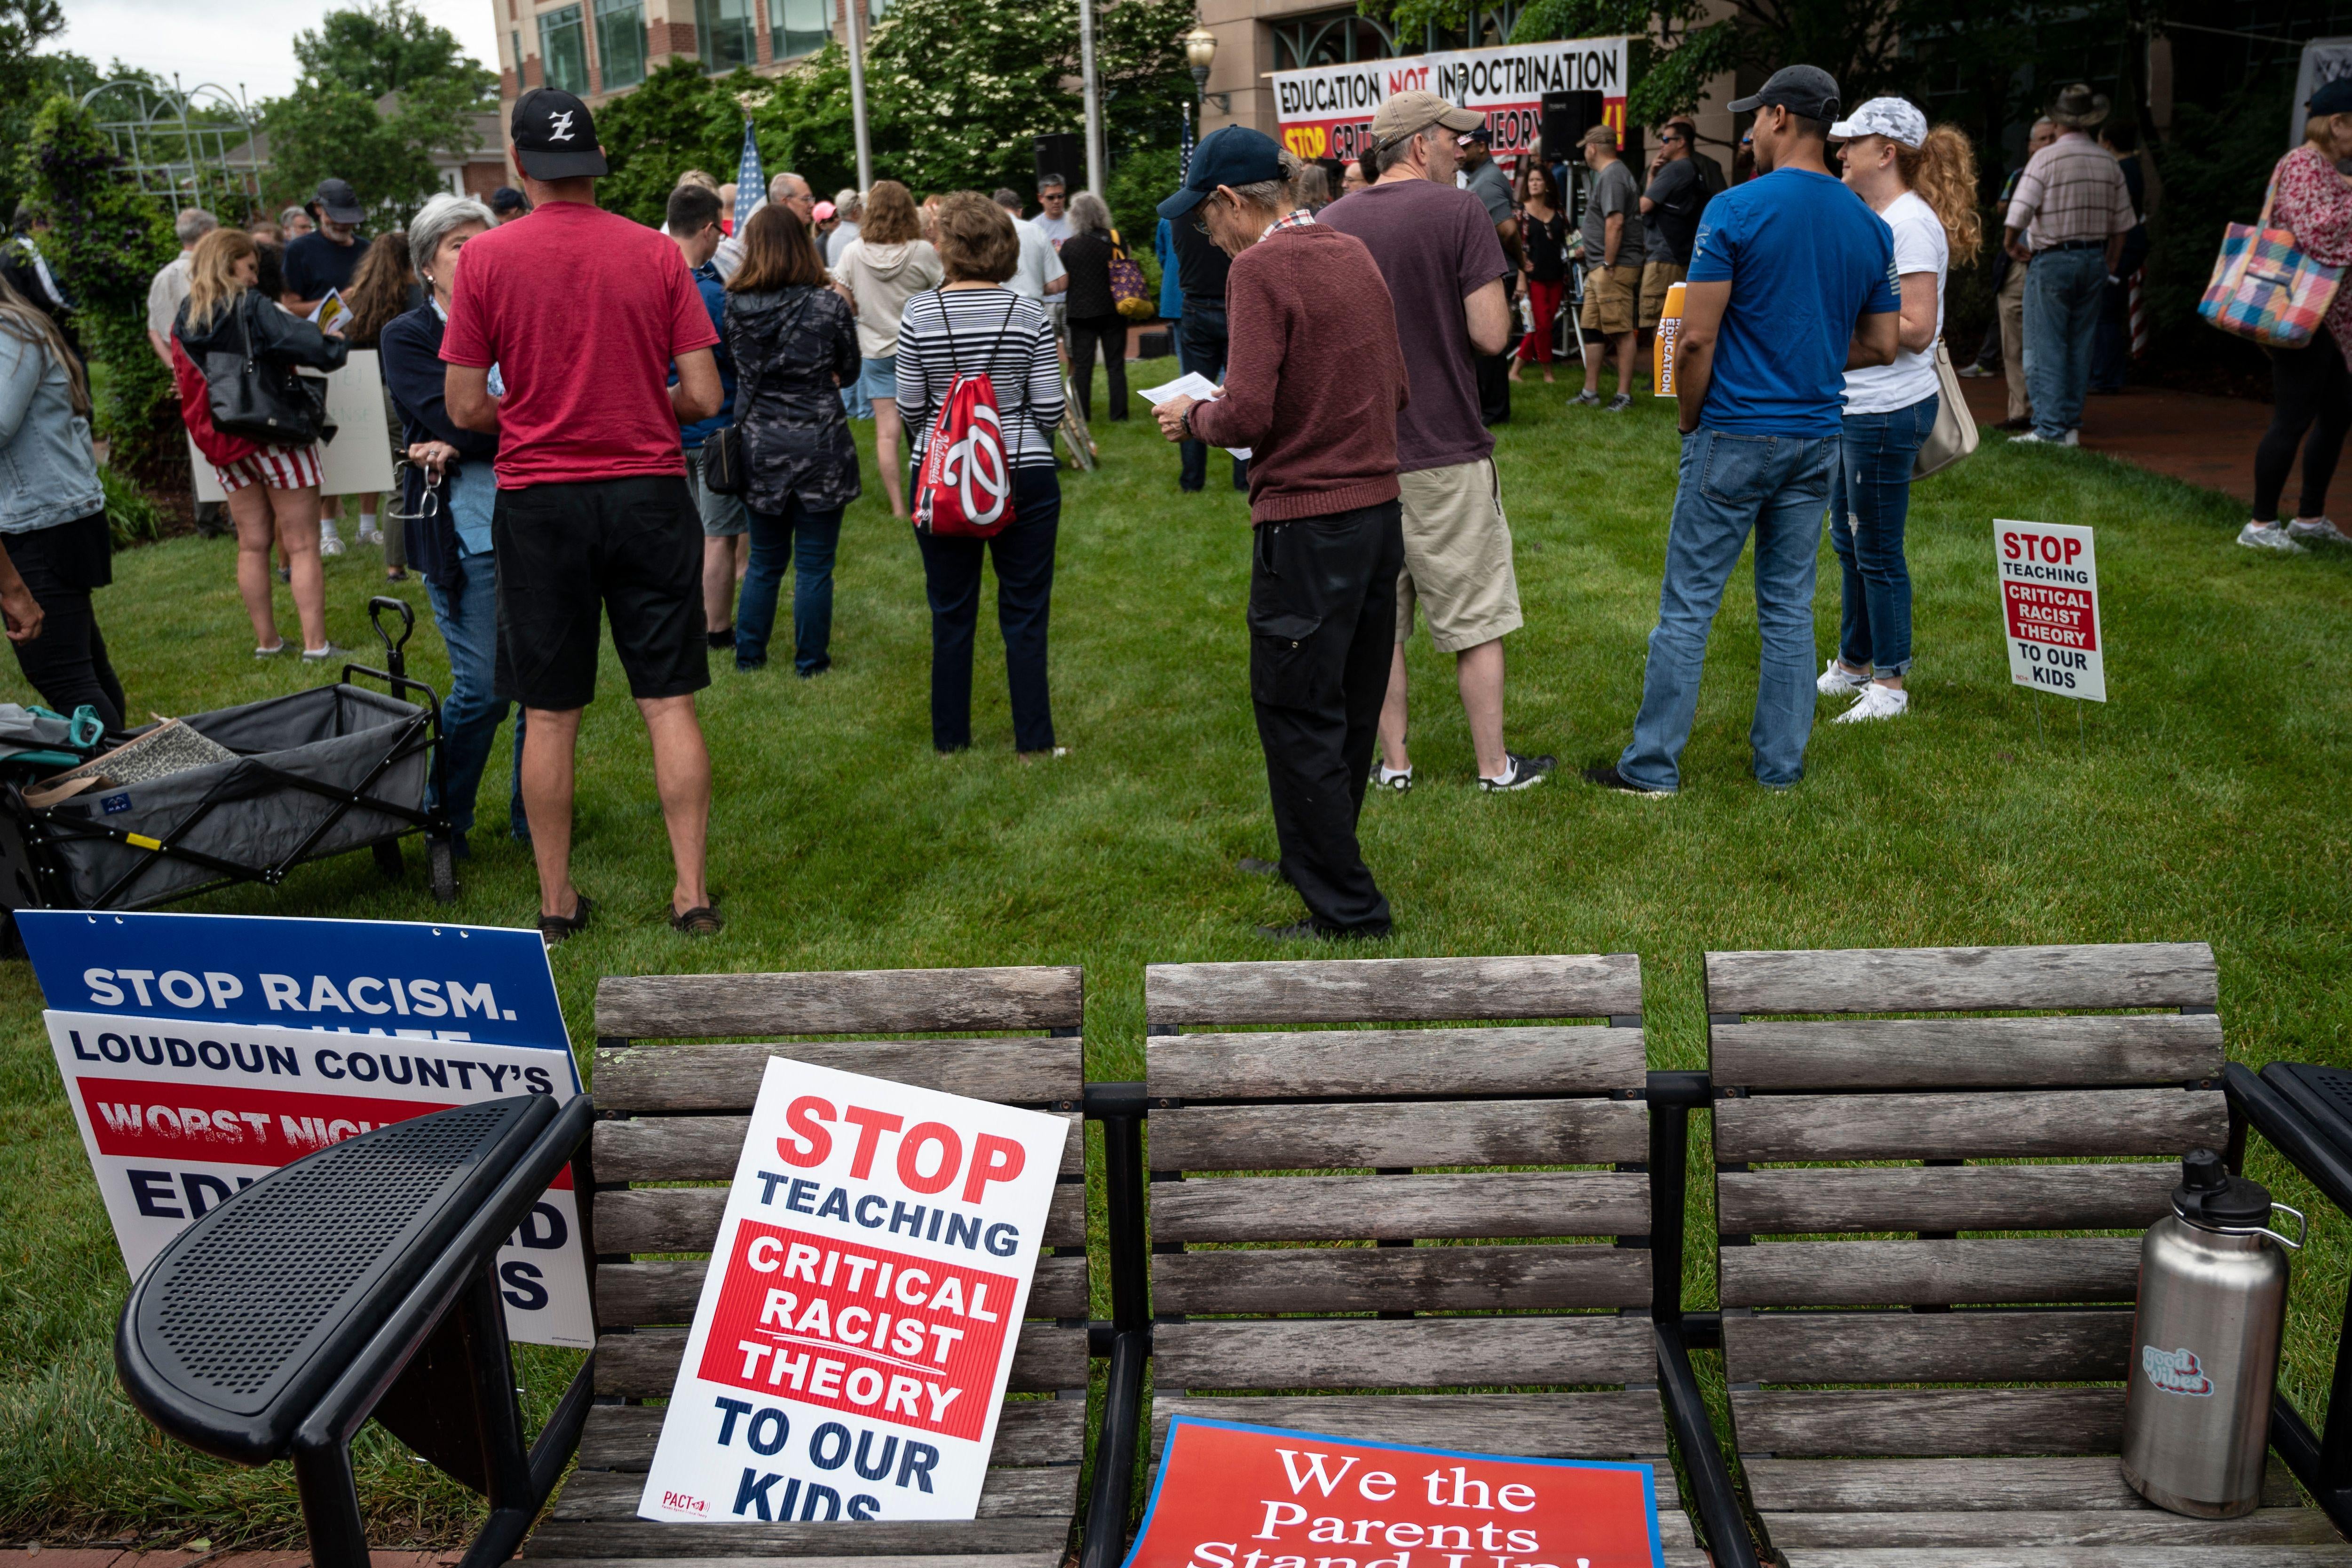 Signs that read "stop teaching critical racist theory to our kids" are seen on a bench during a rally against "critical race theory" being taught in schools at the Loudoun County Government center in Leesburg, Virginia on June 12, 2021. 